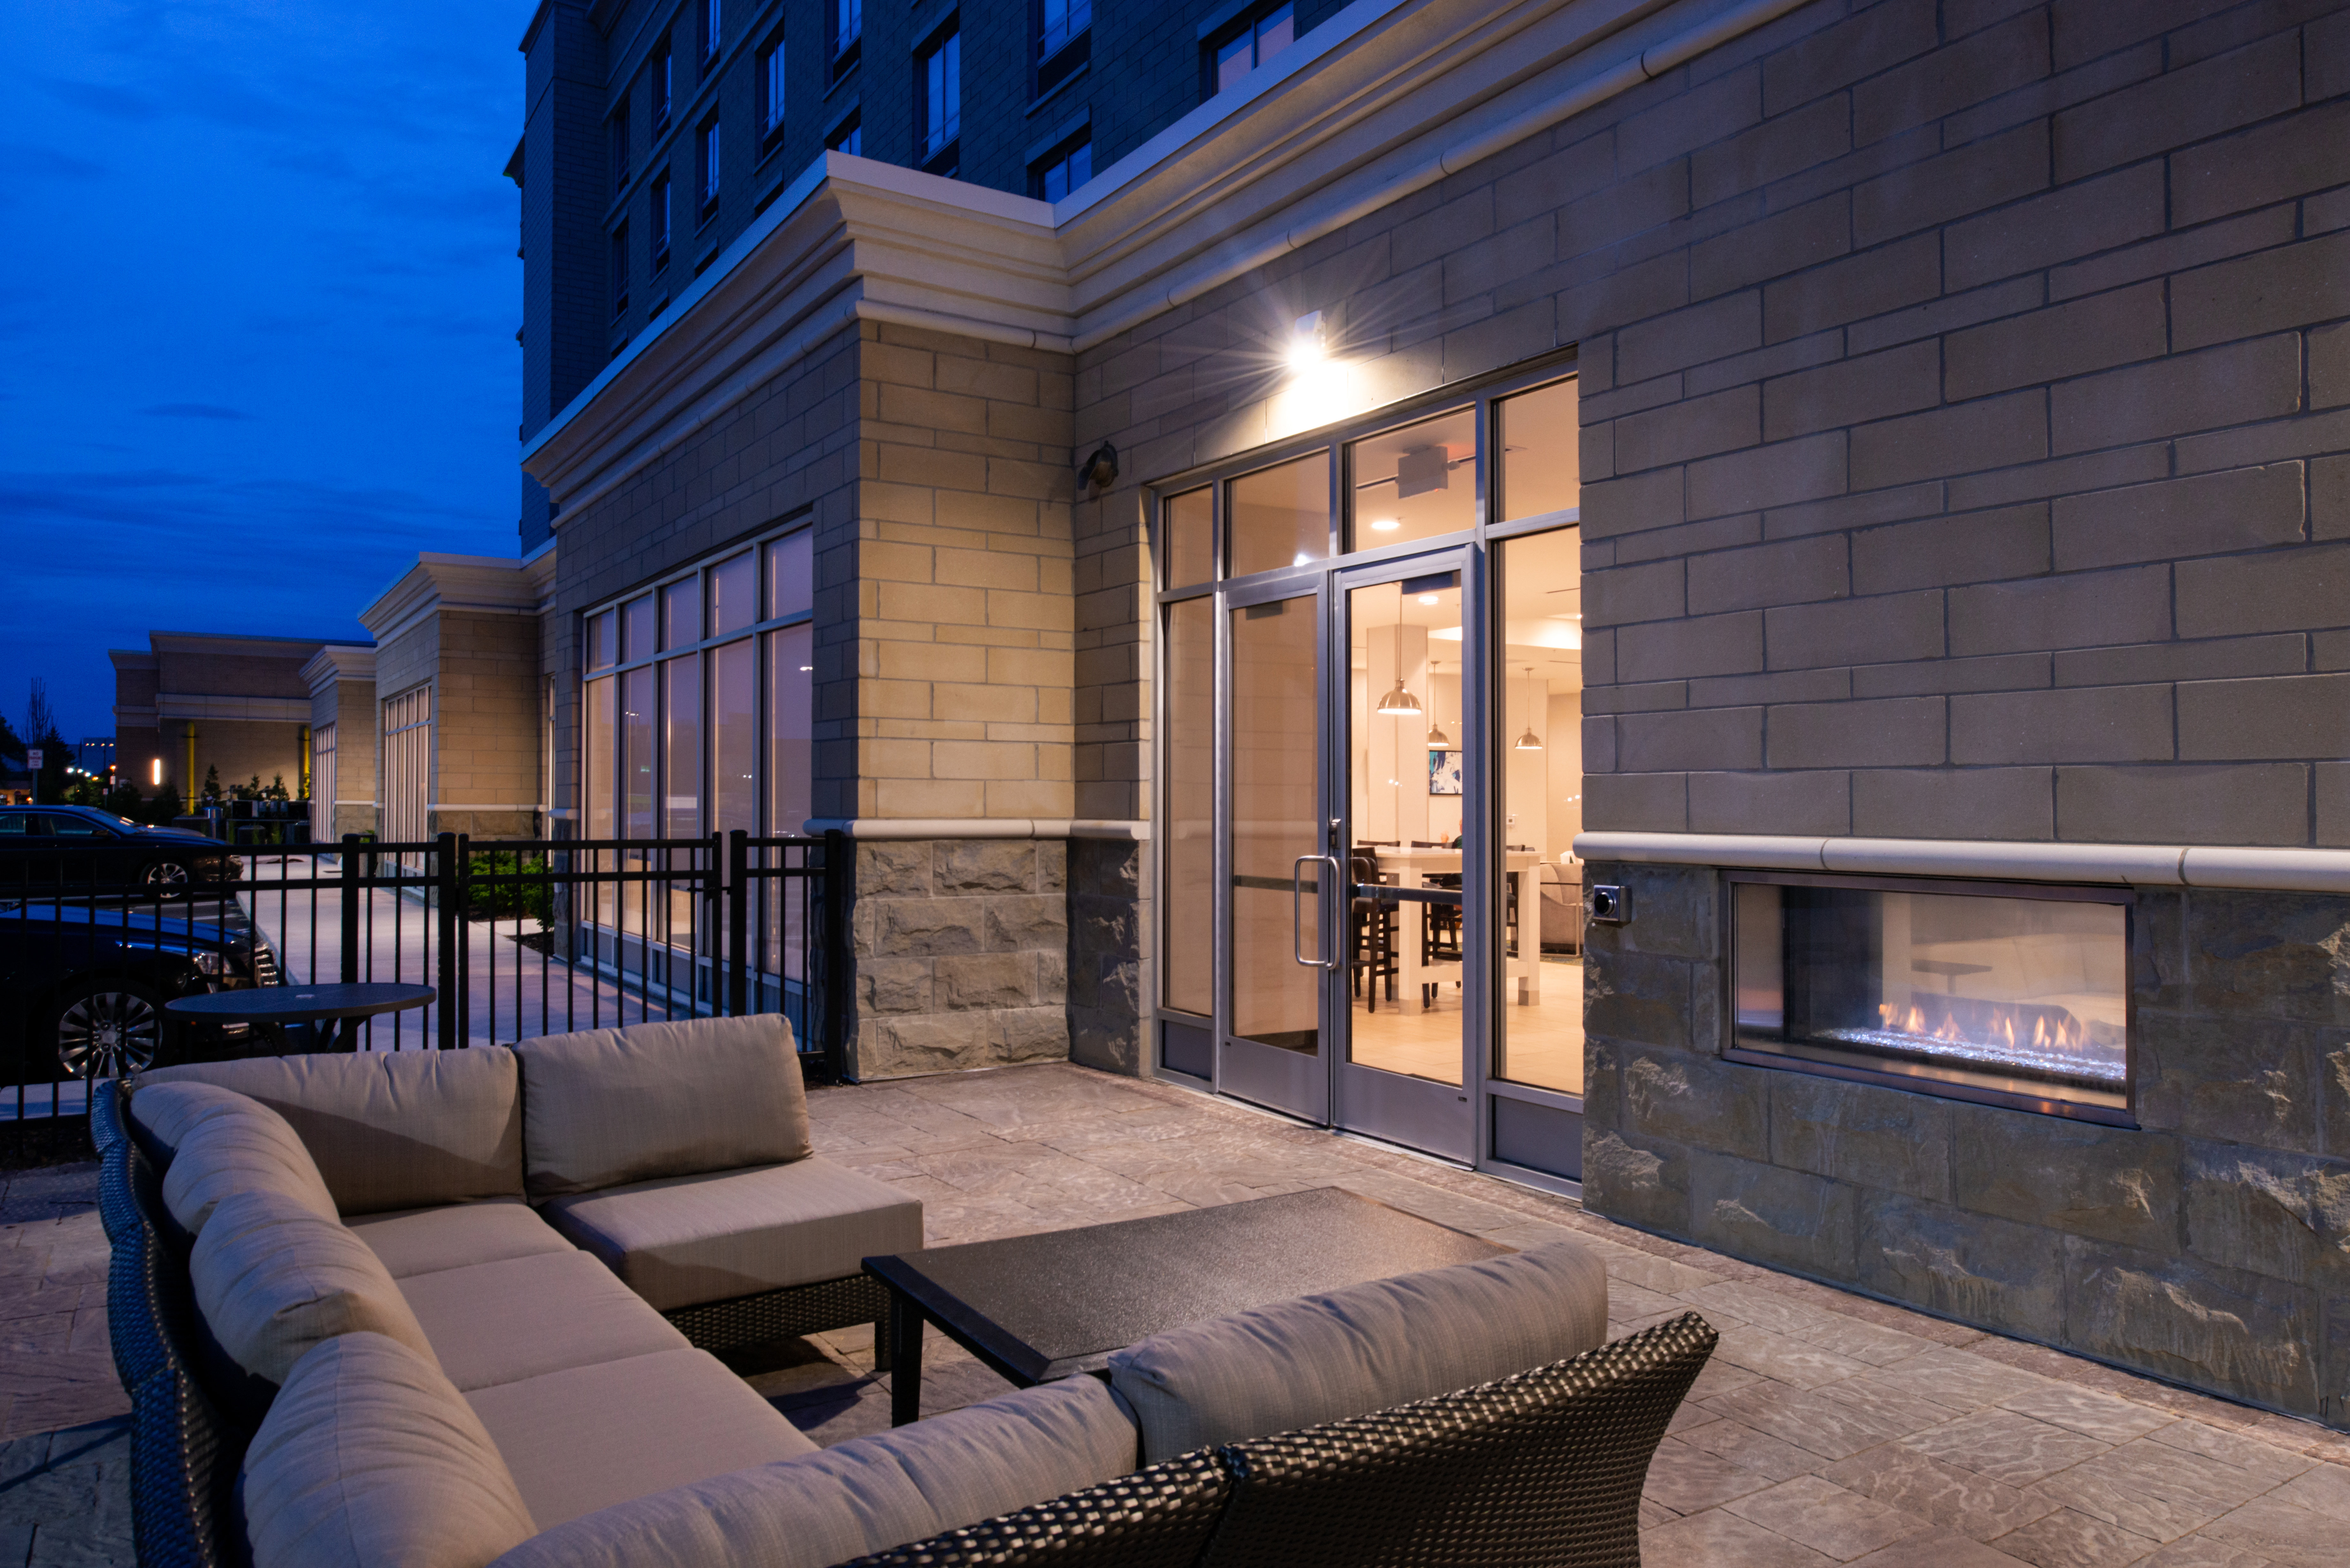 Unplug and relax on our outdoor patio.